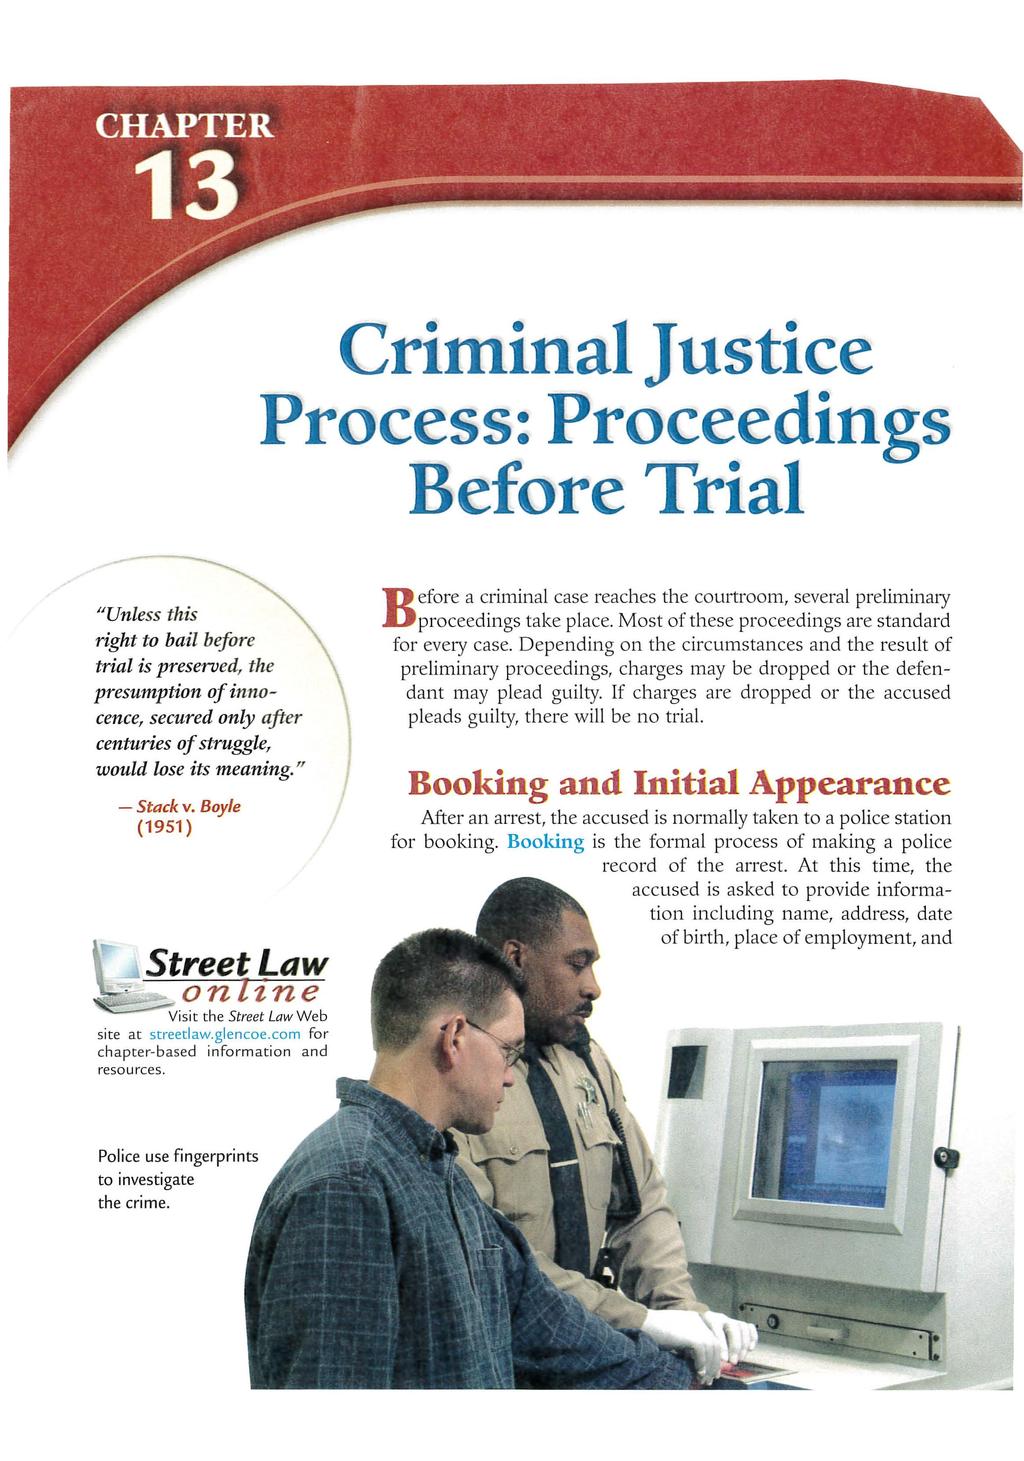 Criminal Justice Process: Proceedings Before Trial "Unless this right to bail before trial is preseroed, the presumption of innocence, secured only after centuries of struggle, would lose its meaning.